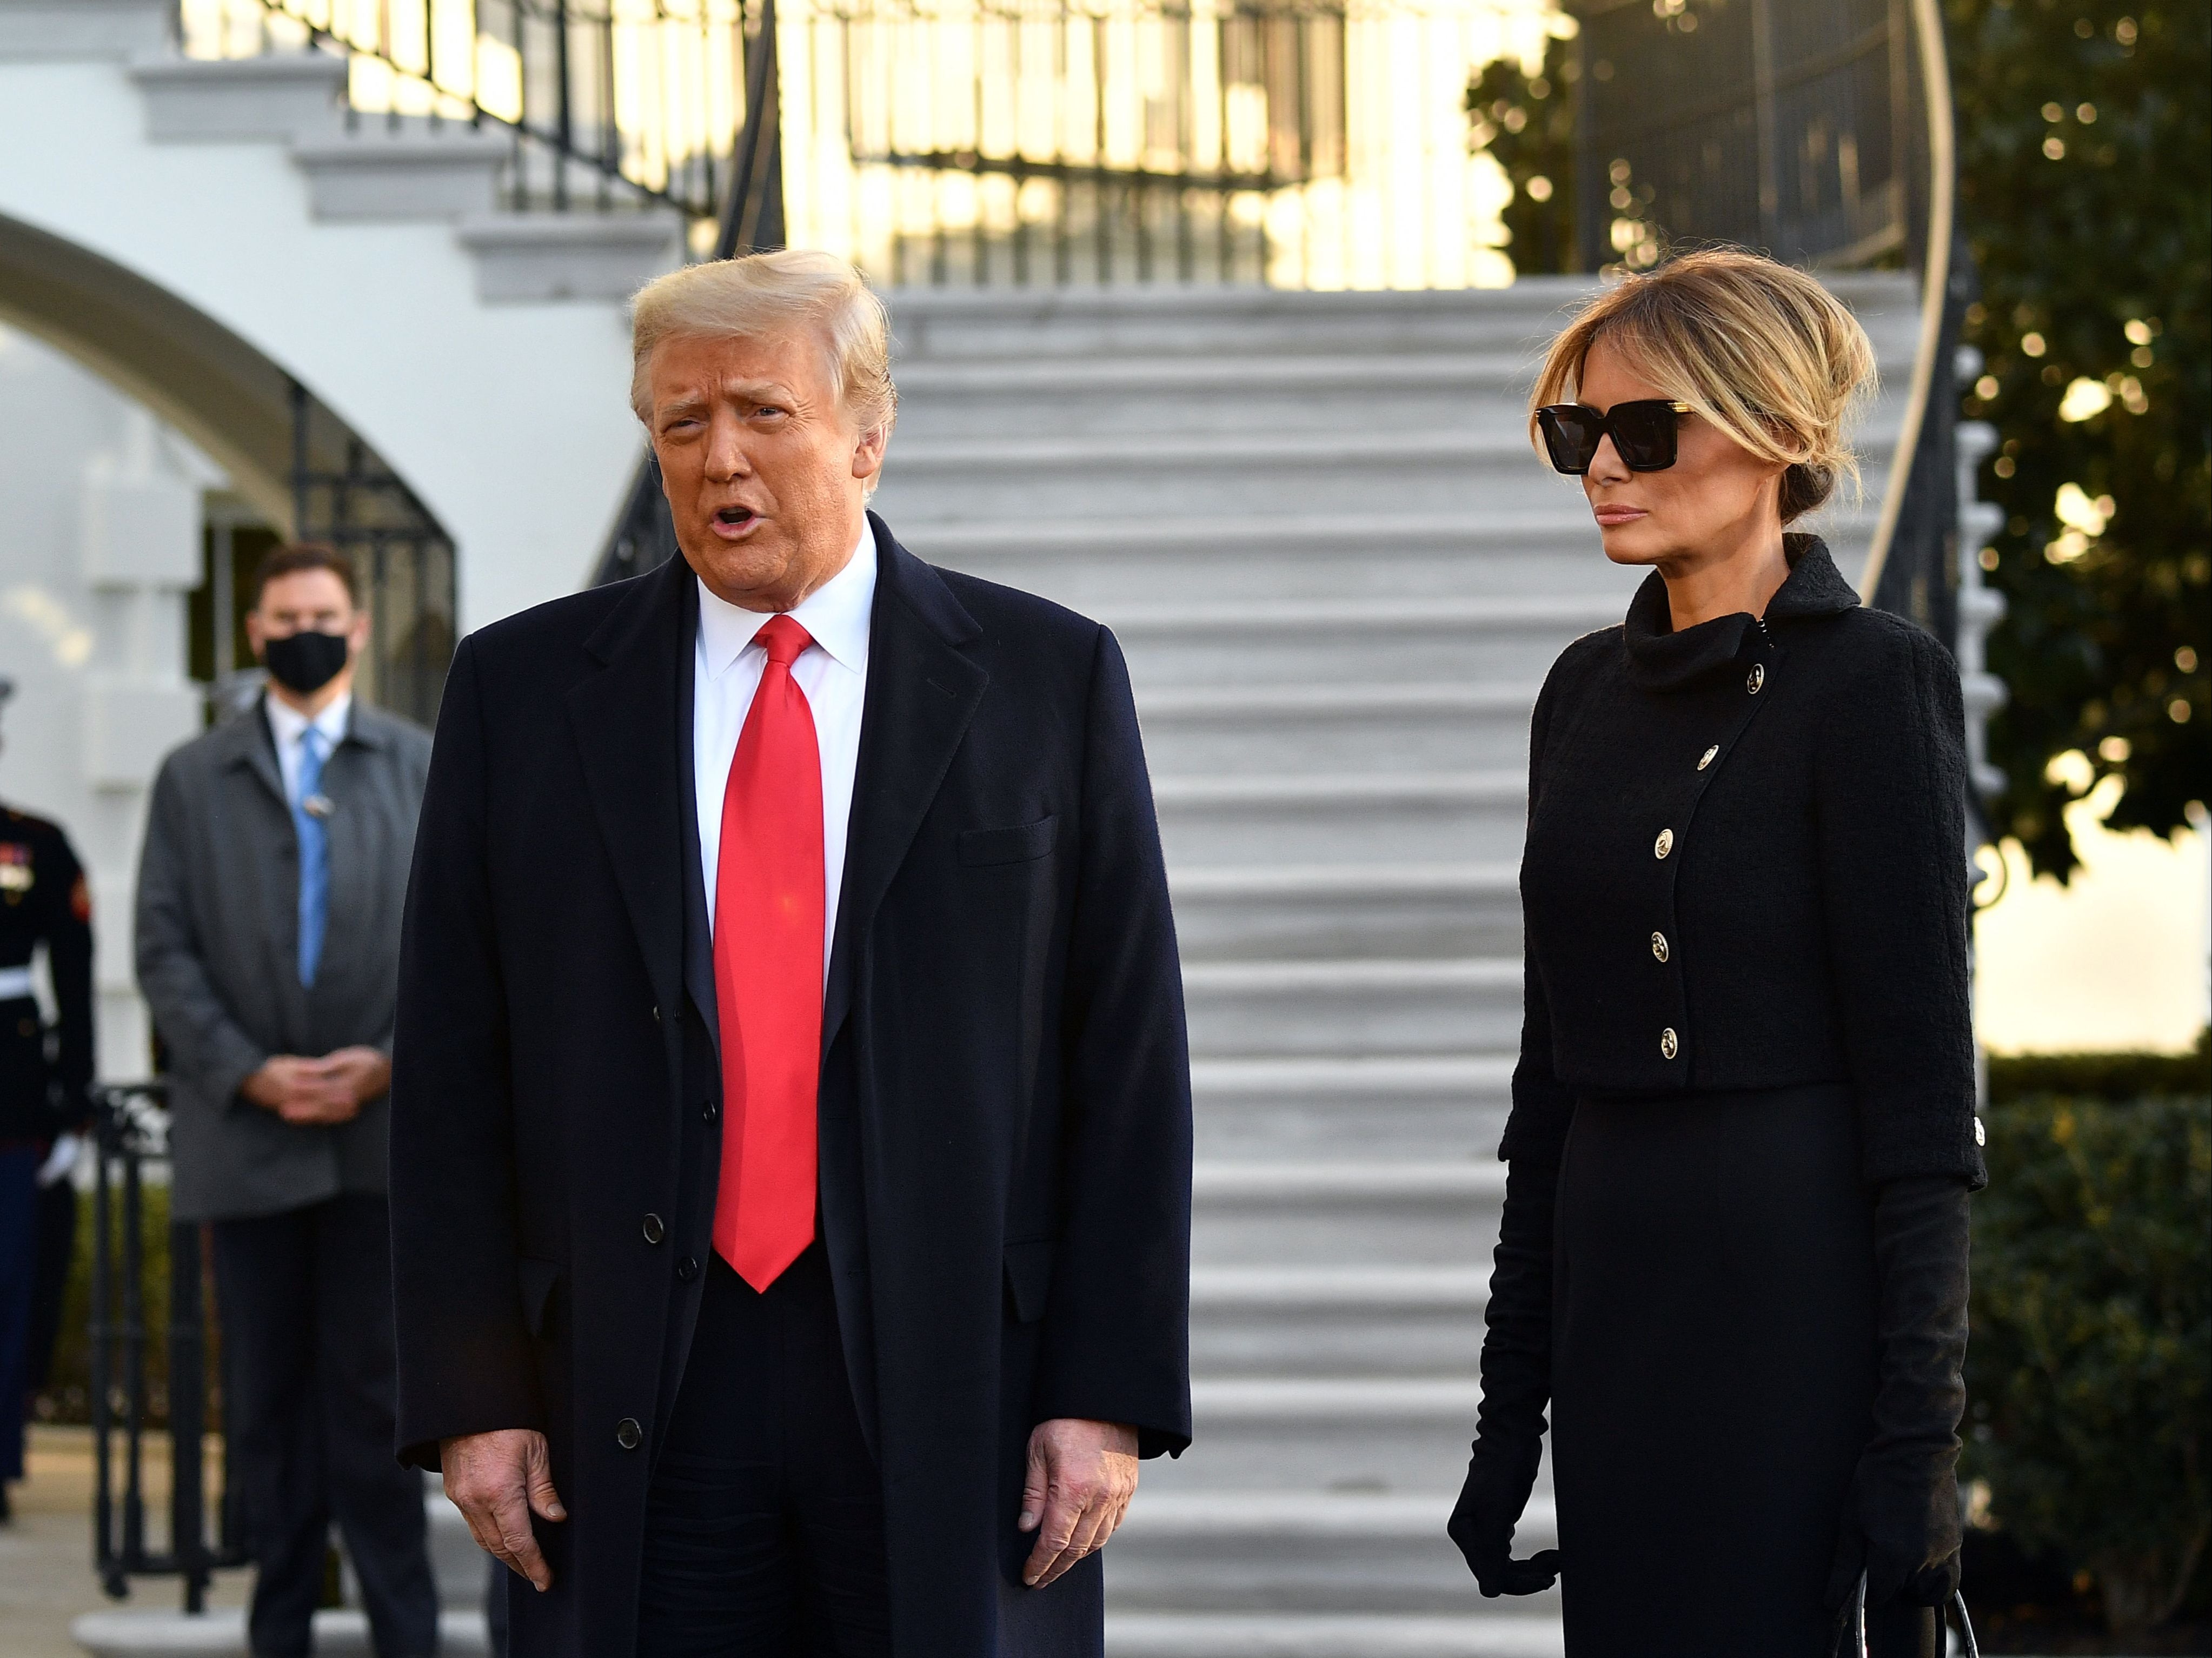 Donald Trump and Melania Trump depart the White House for the last time on the morning of Inauguration Day. The couple is eschewing the tradition of meeting the incoming first family and will not attend president-elect Biden’s inauguration. Ms Trump has not given incoming first lady, Jill Biden, a tour of the private residence and has reportedly not been in touch with her at all